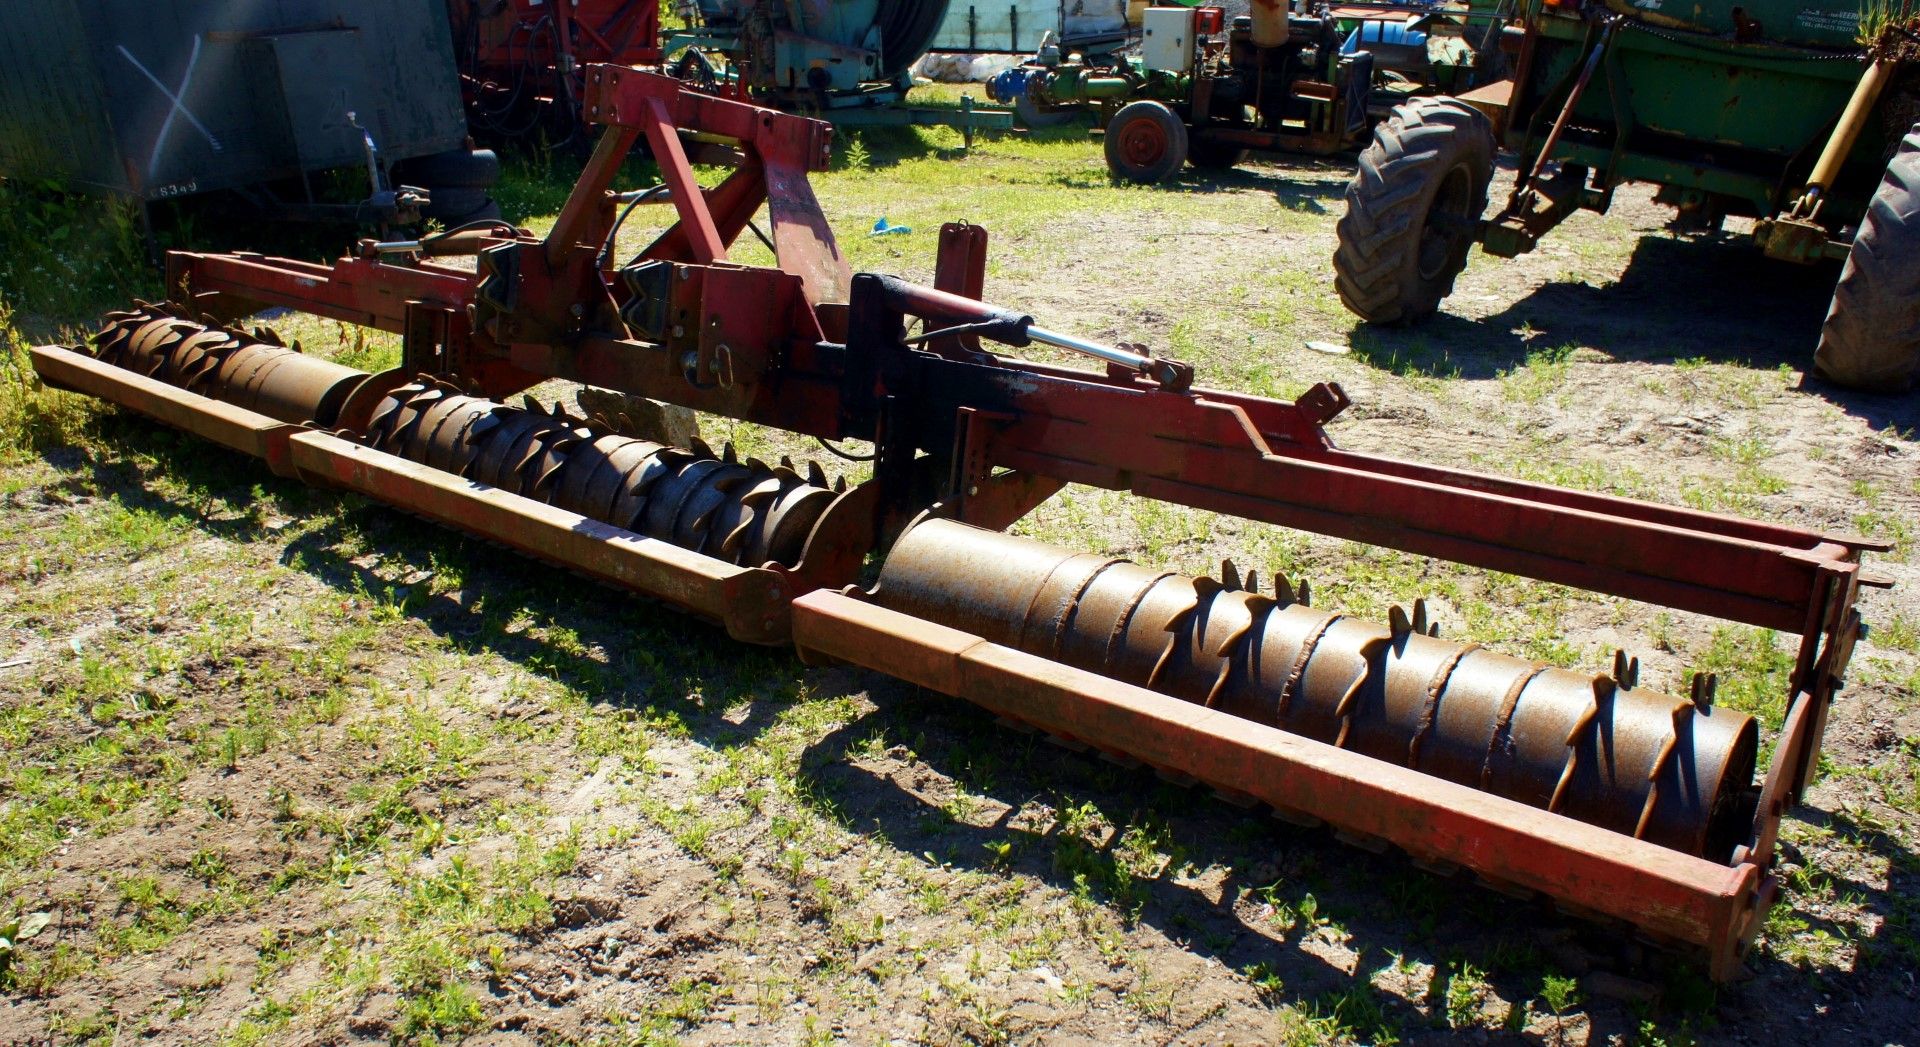 Force FDM6000, 6m Drillmate, Bed Roller/Cultivator, Serial Number P6285